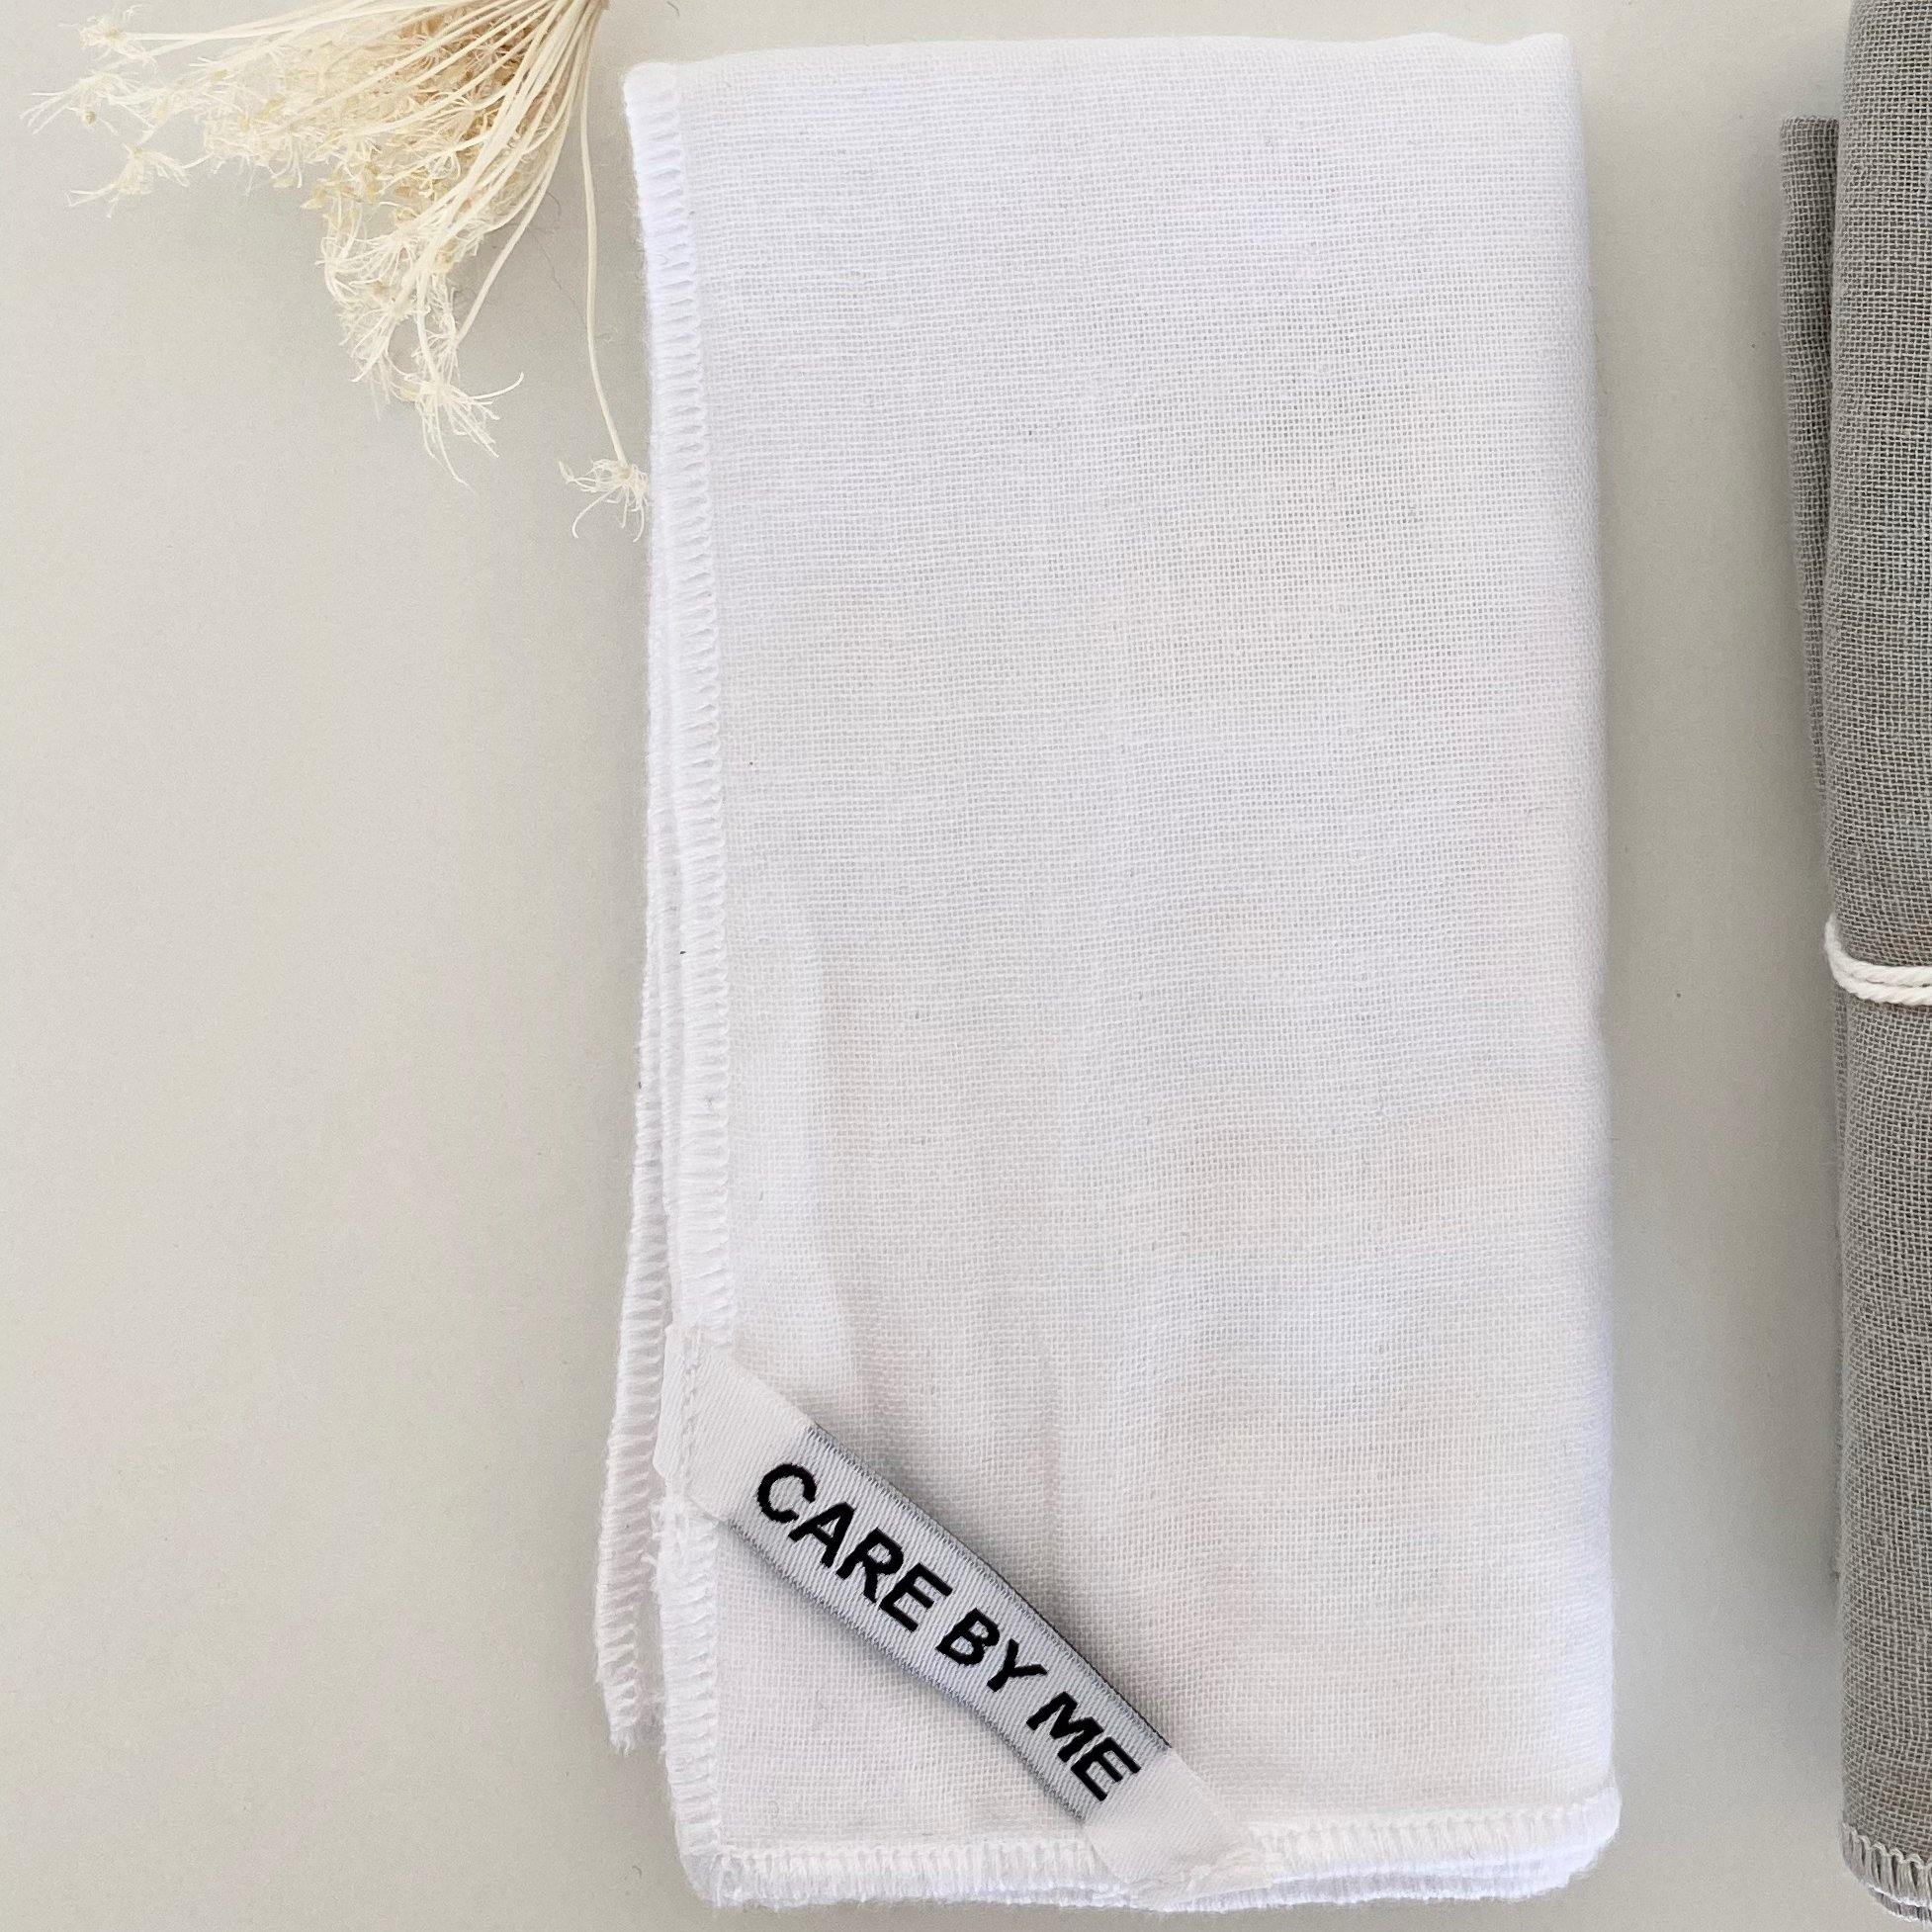 PURE Washcloths (3) - CARE BY ME USA